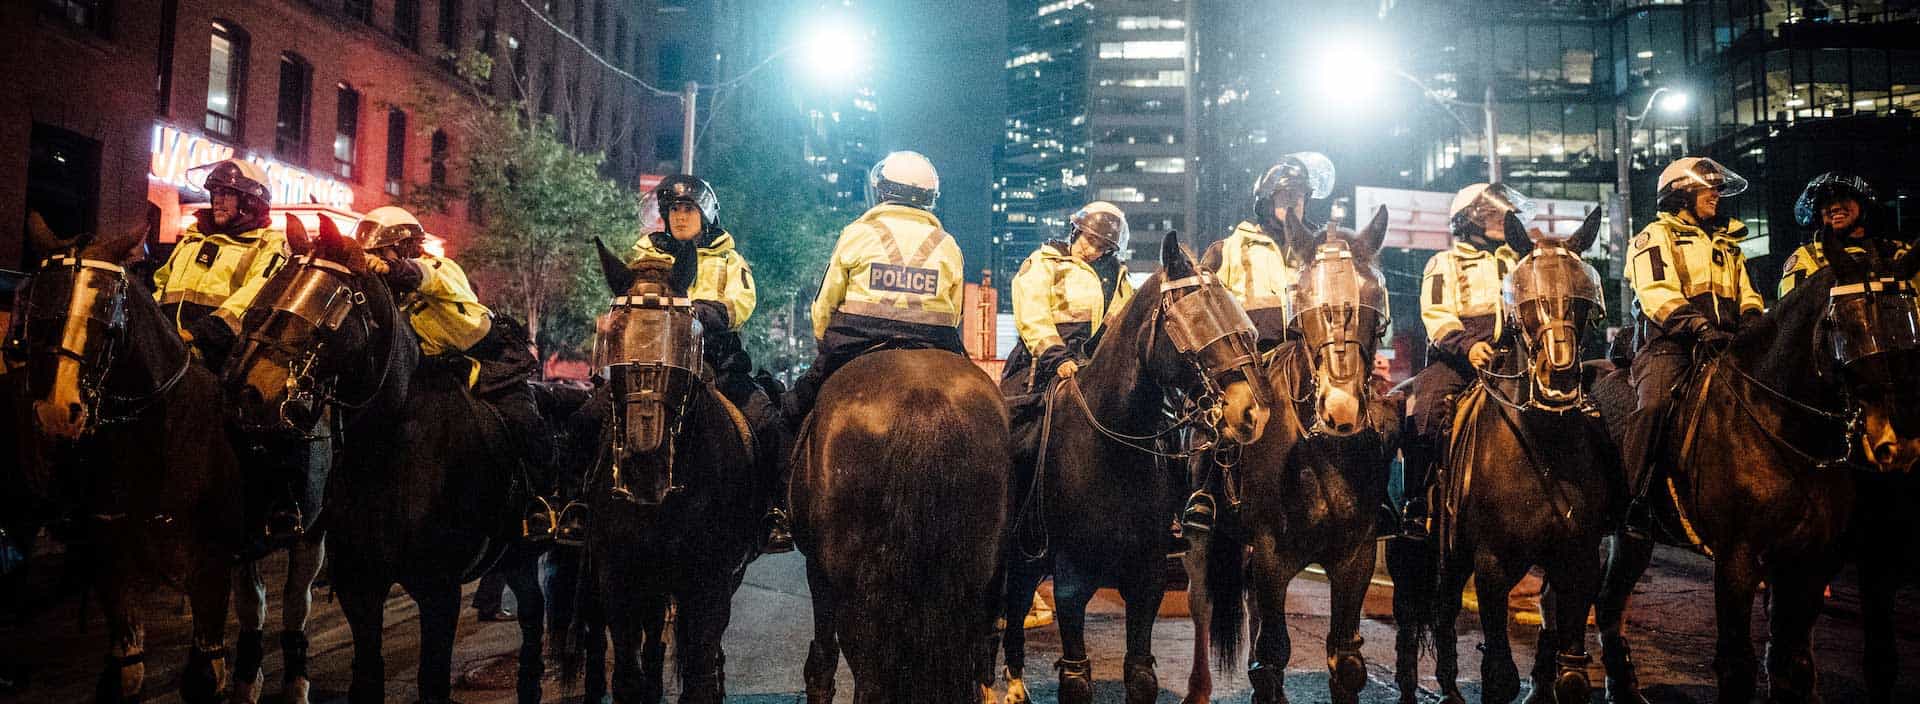 Group of police on horses